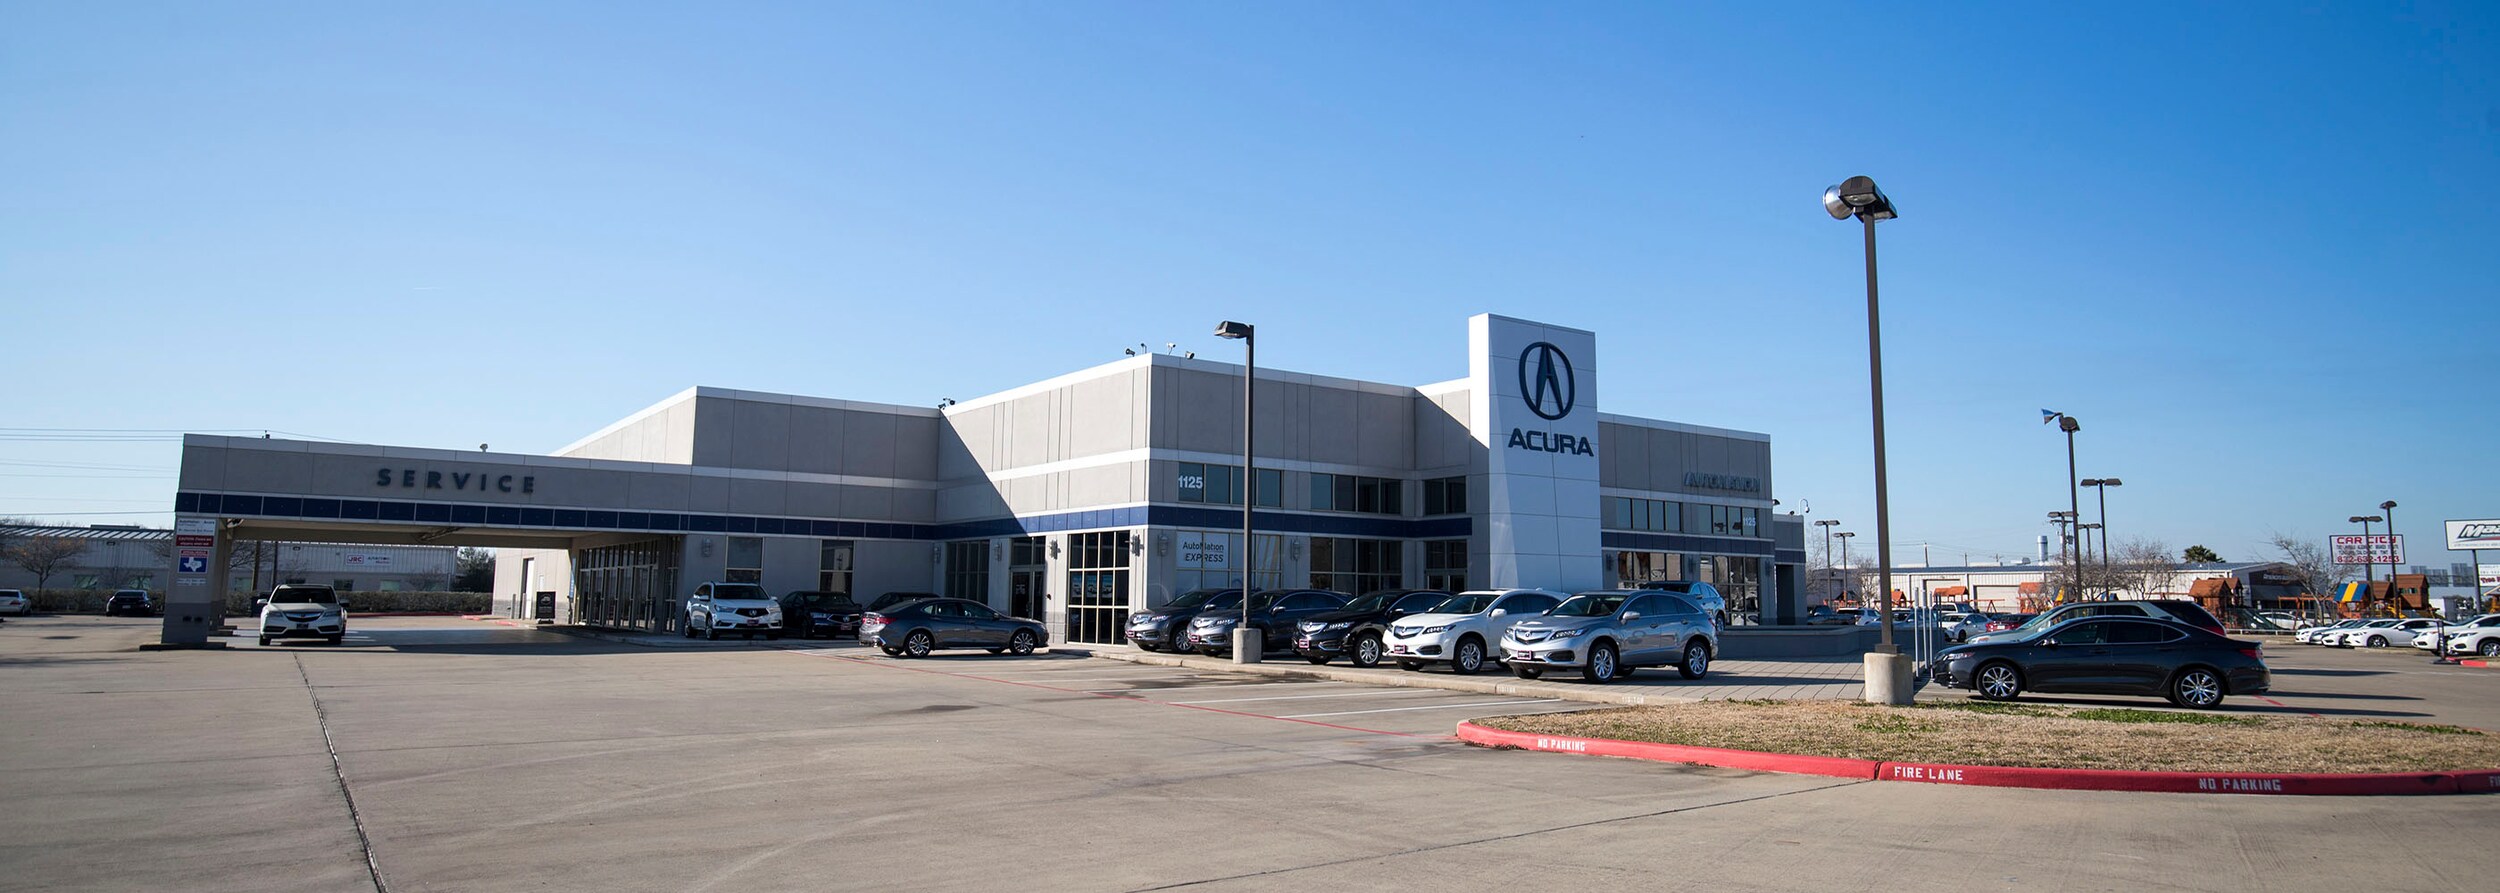 Hours And Directions Autonation Acura Gulf Freeway